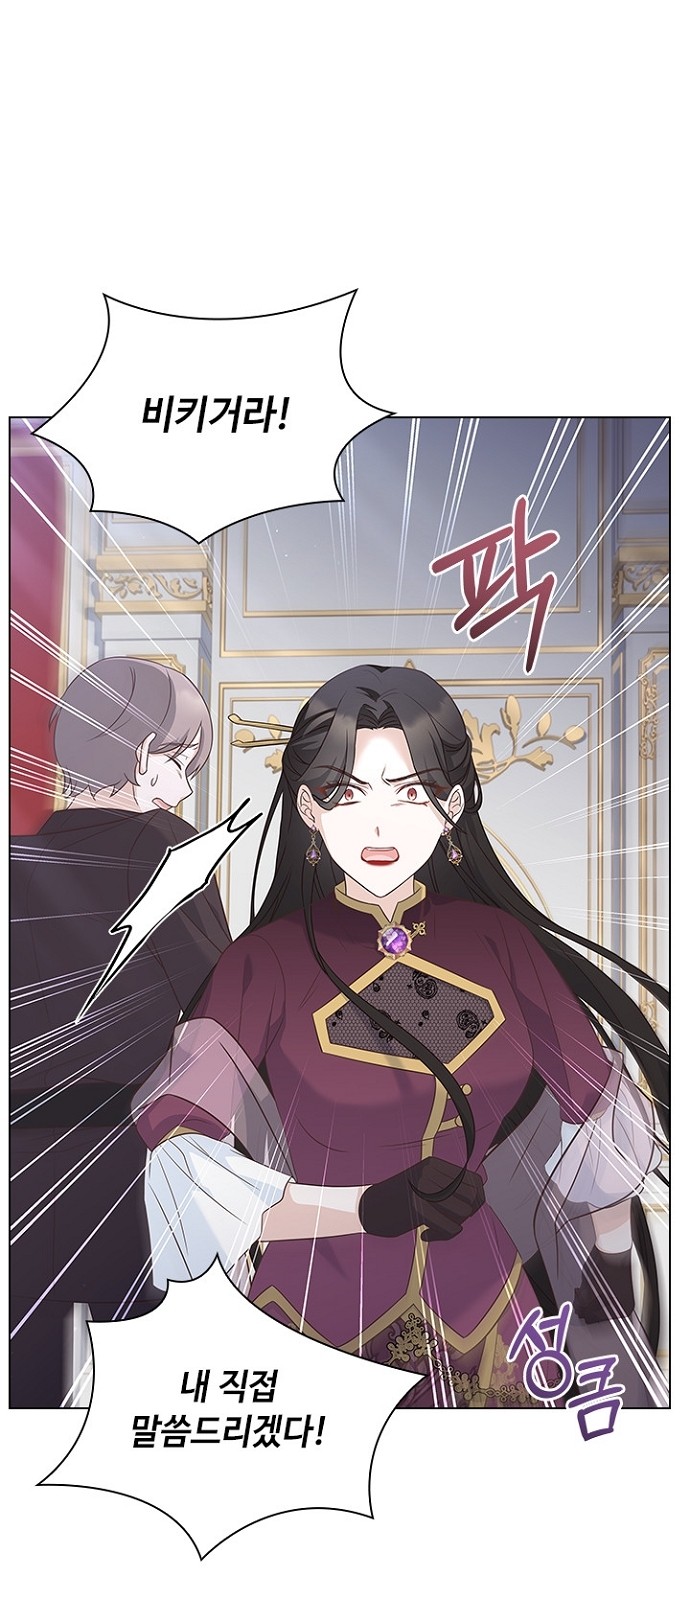 His Majesty's Proposal (A Night With the Emperor) - Chapter 91 - Page 2